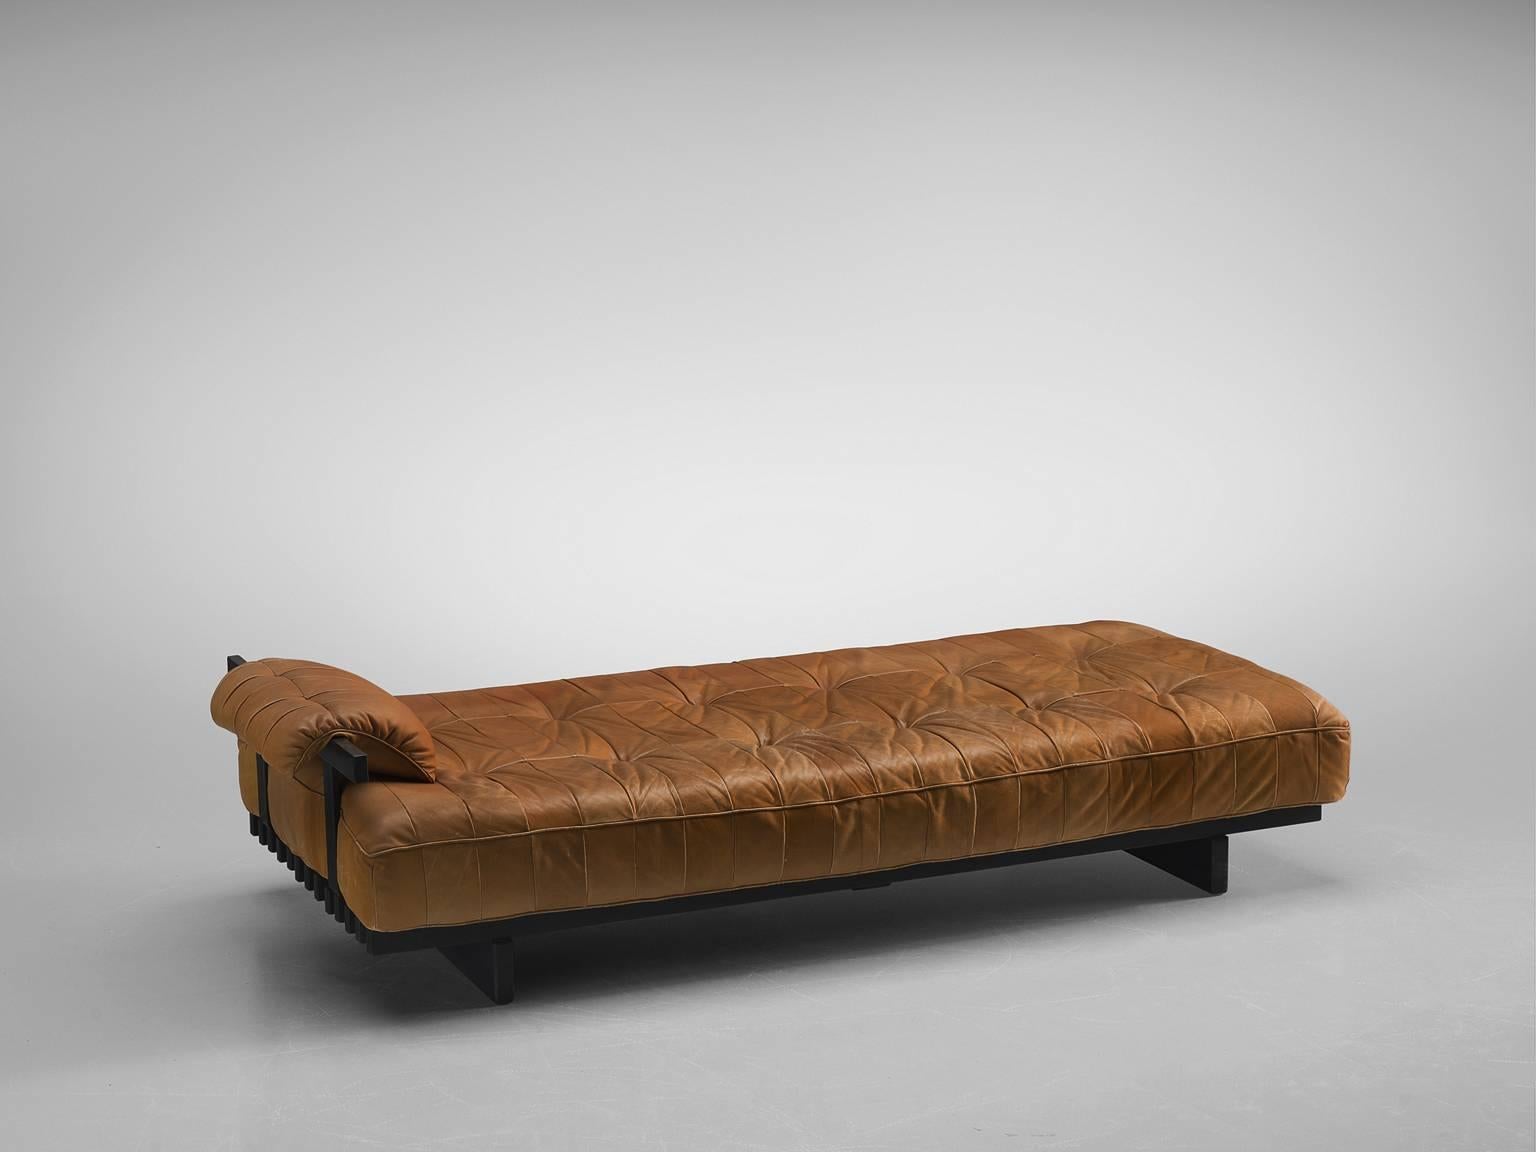 Ueli Berger for De Sede, daybed and settee in one, DS 80, cognac leather and wood, Switzerland, 1960s.

This Classic daybed and sofa by De Sede is executed in soft patchwork aniline leather and a black lacquered frame. The sofa comes with a complete